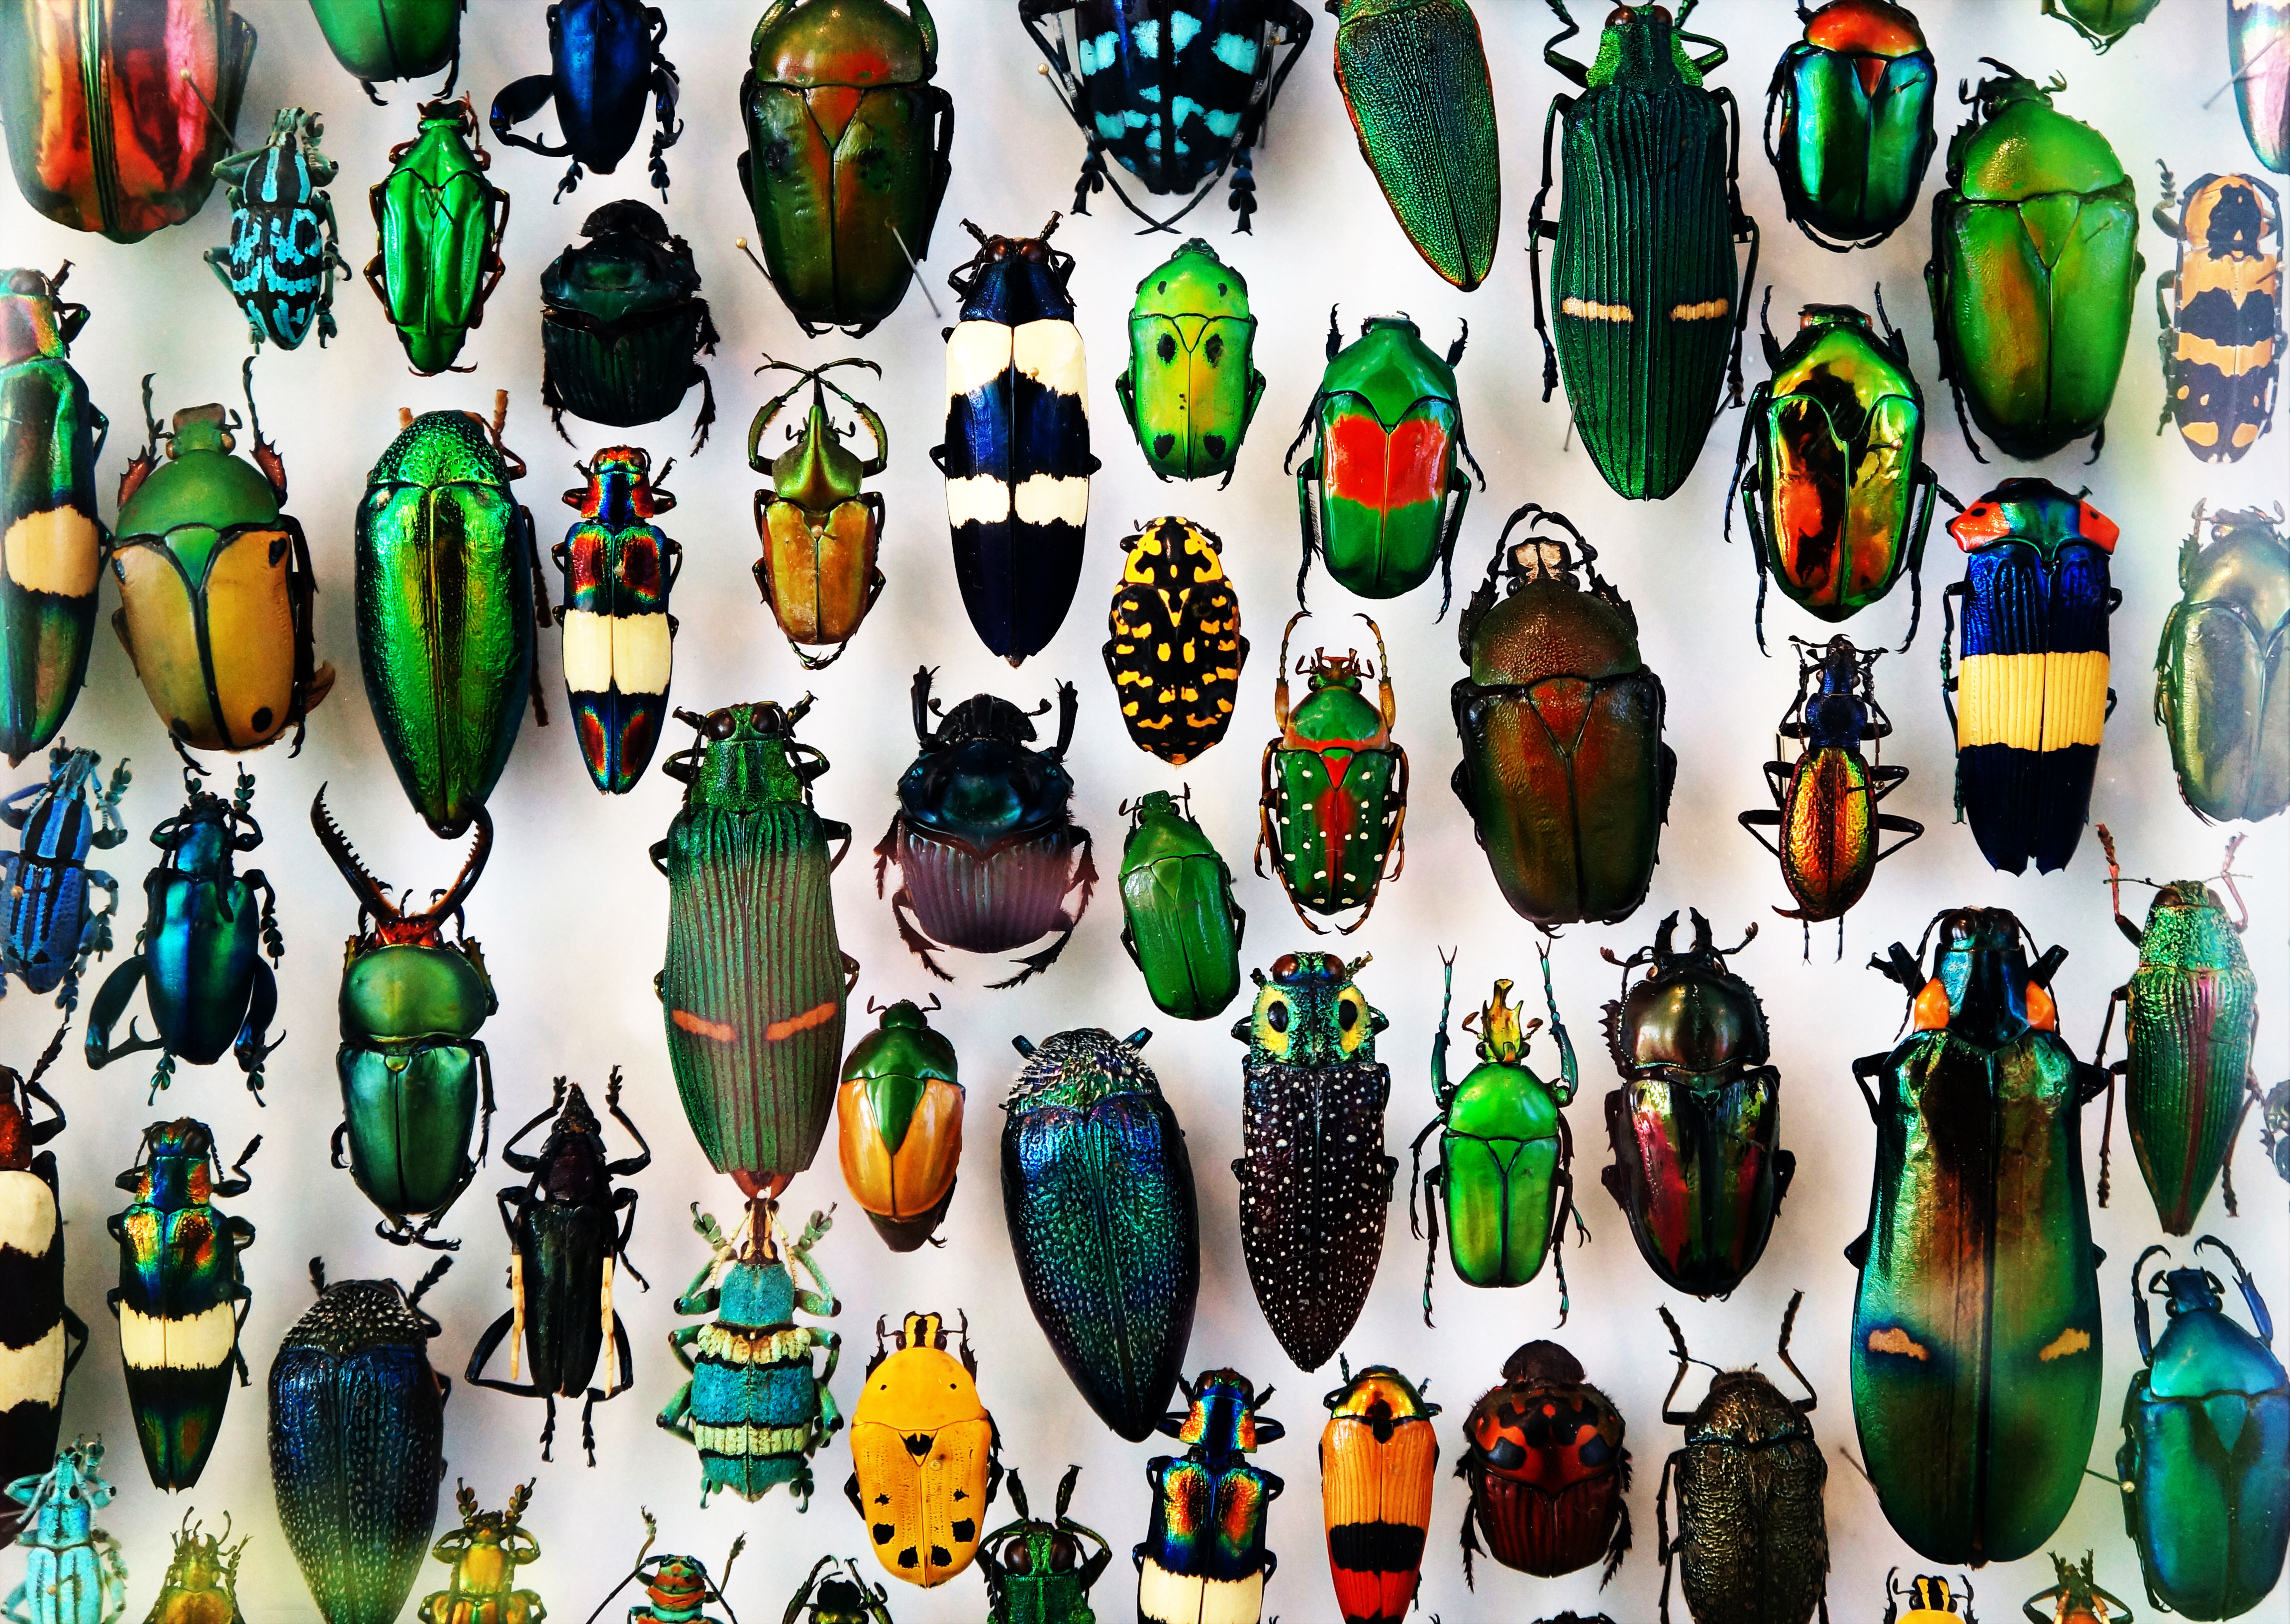 There are so many types of jewel beetles alone (pixelprof/iStock)